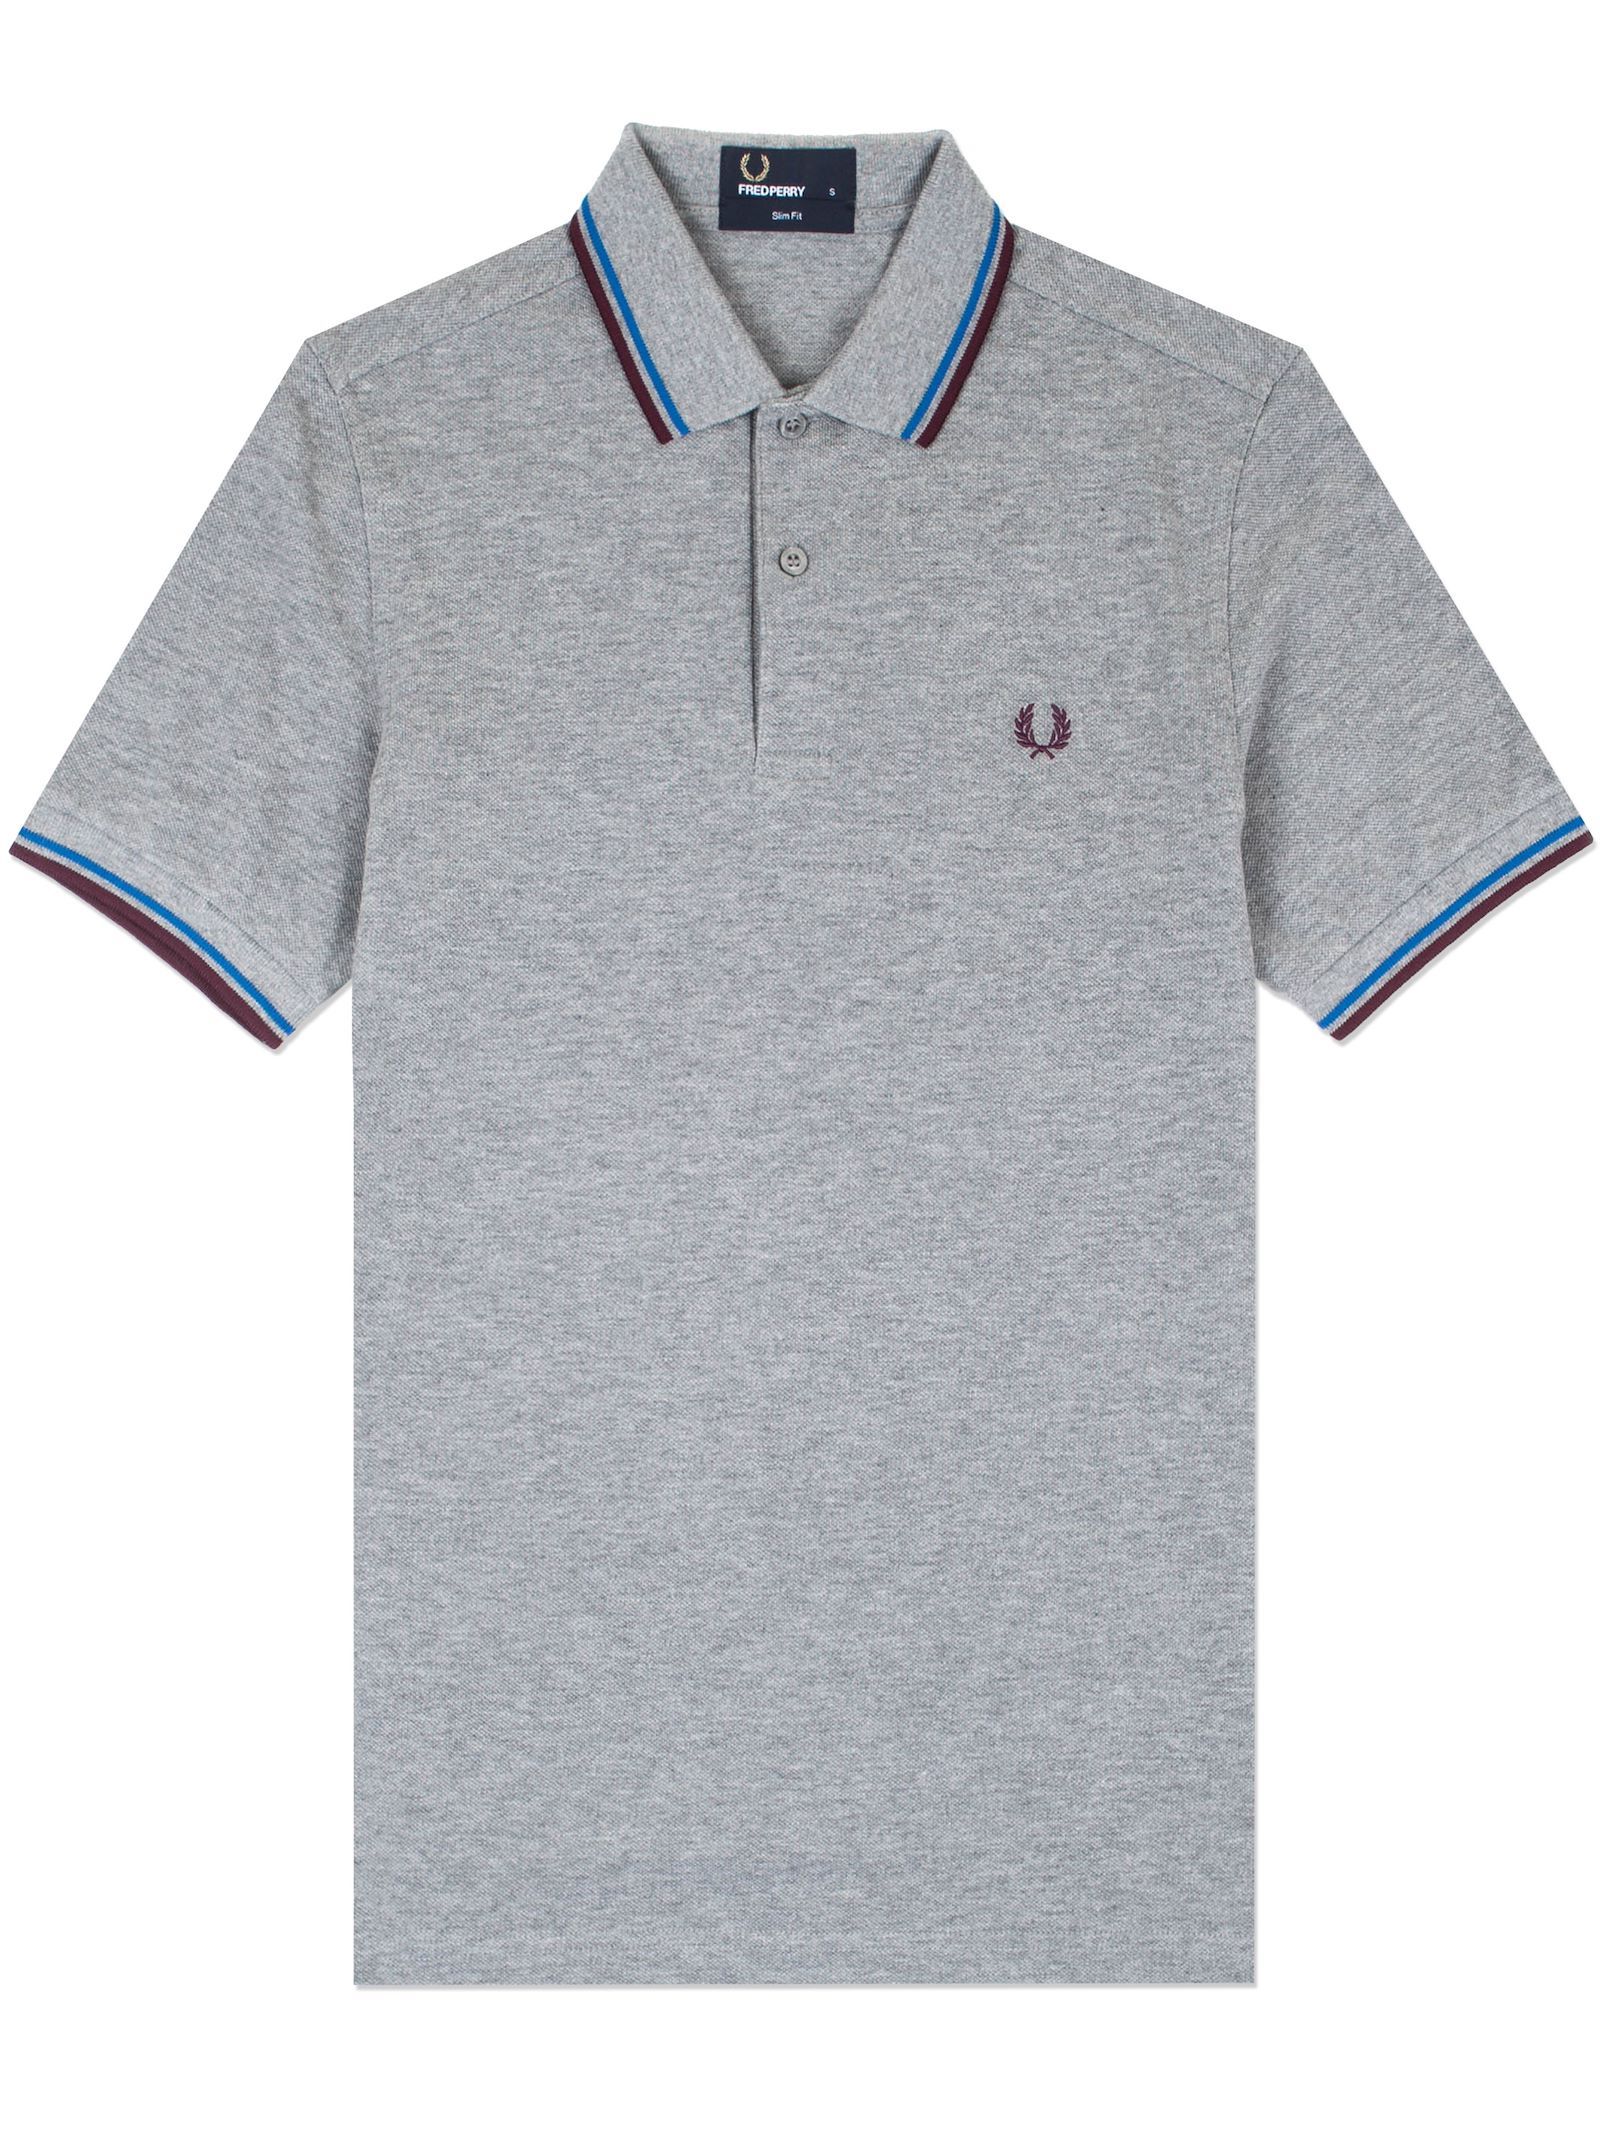 Fred Perry The Fred Perry Shirt in Steel Marl | Dapper Street